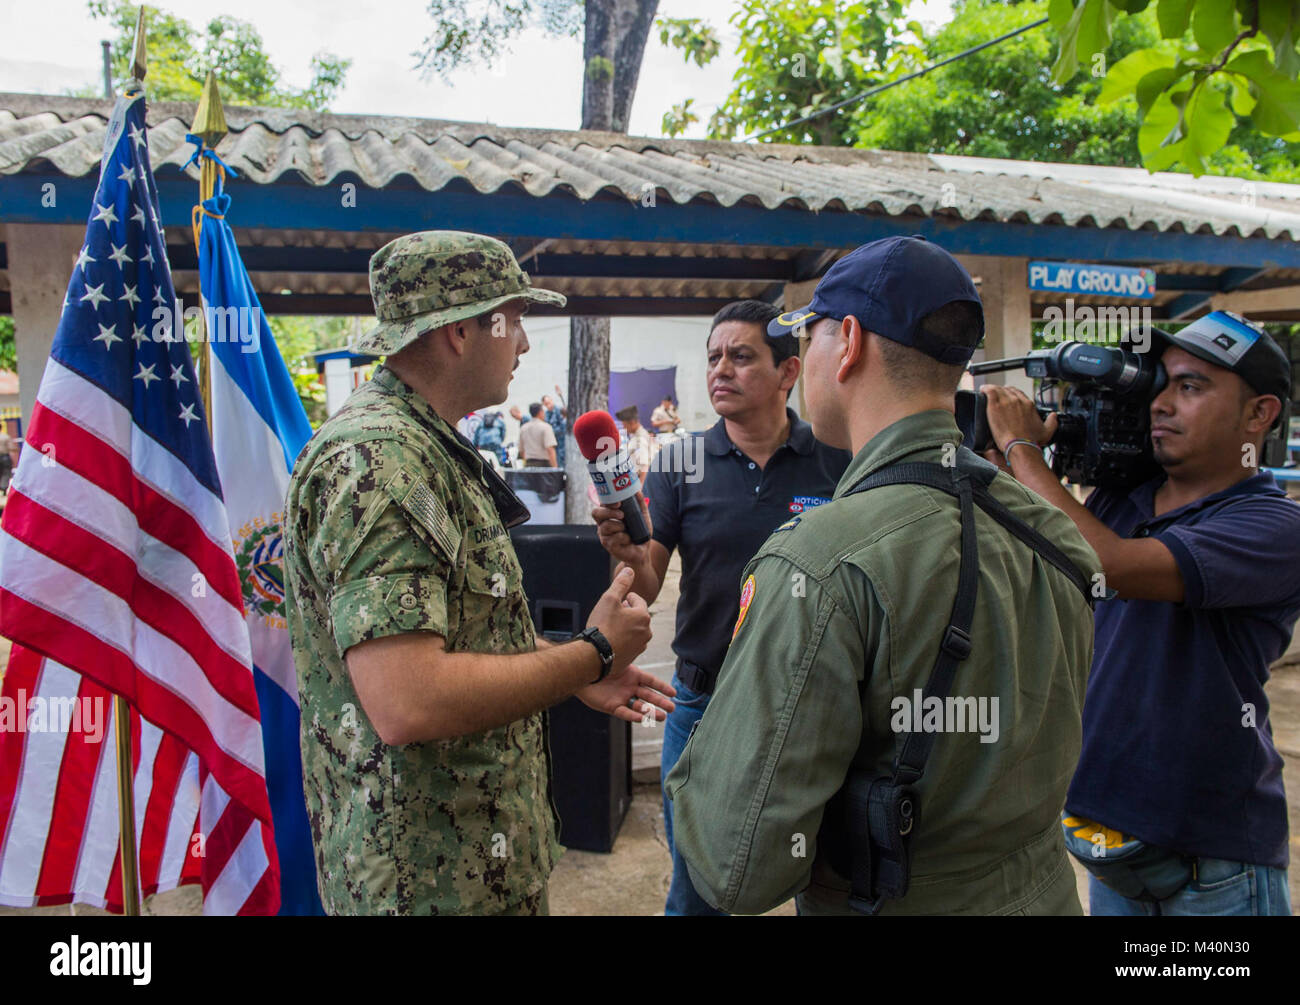 150617-N-PD309-288 SAN JULIAN, El Salvador (June 17, 2015) Lt. j.g. Will Drummond, a native of Fort Worth, Texas, assigned to Destroyer Squadron 40, speaks to members of the Salvadoran press at a medical site established at Centro Escolar Doctor Eduardo Enrique Barrientos during Continuing Promise 2015. Continuing Promise is a U.S. Southern Command-sponsored and U.S. Naval Forces Southern Command/U.S. 4th Fleet-conducted deployment to conduct civil-military operations including humanitarian-civil assistance, subject matter expert exchanges, medical, dental, veterinary and engineering support a Stock Photo